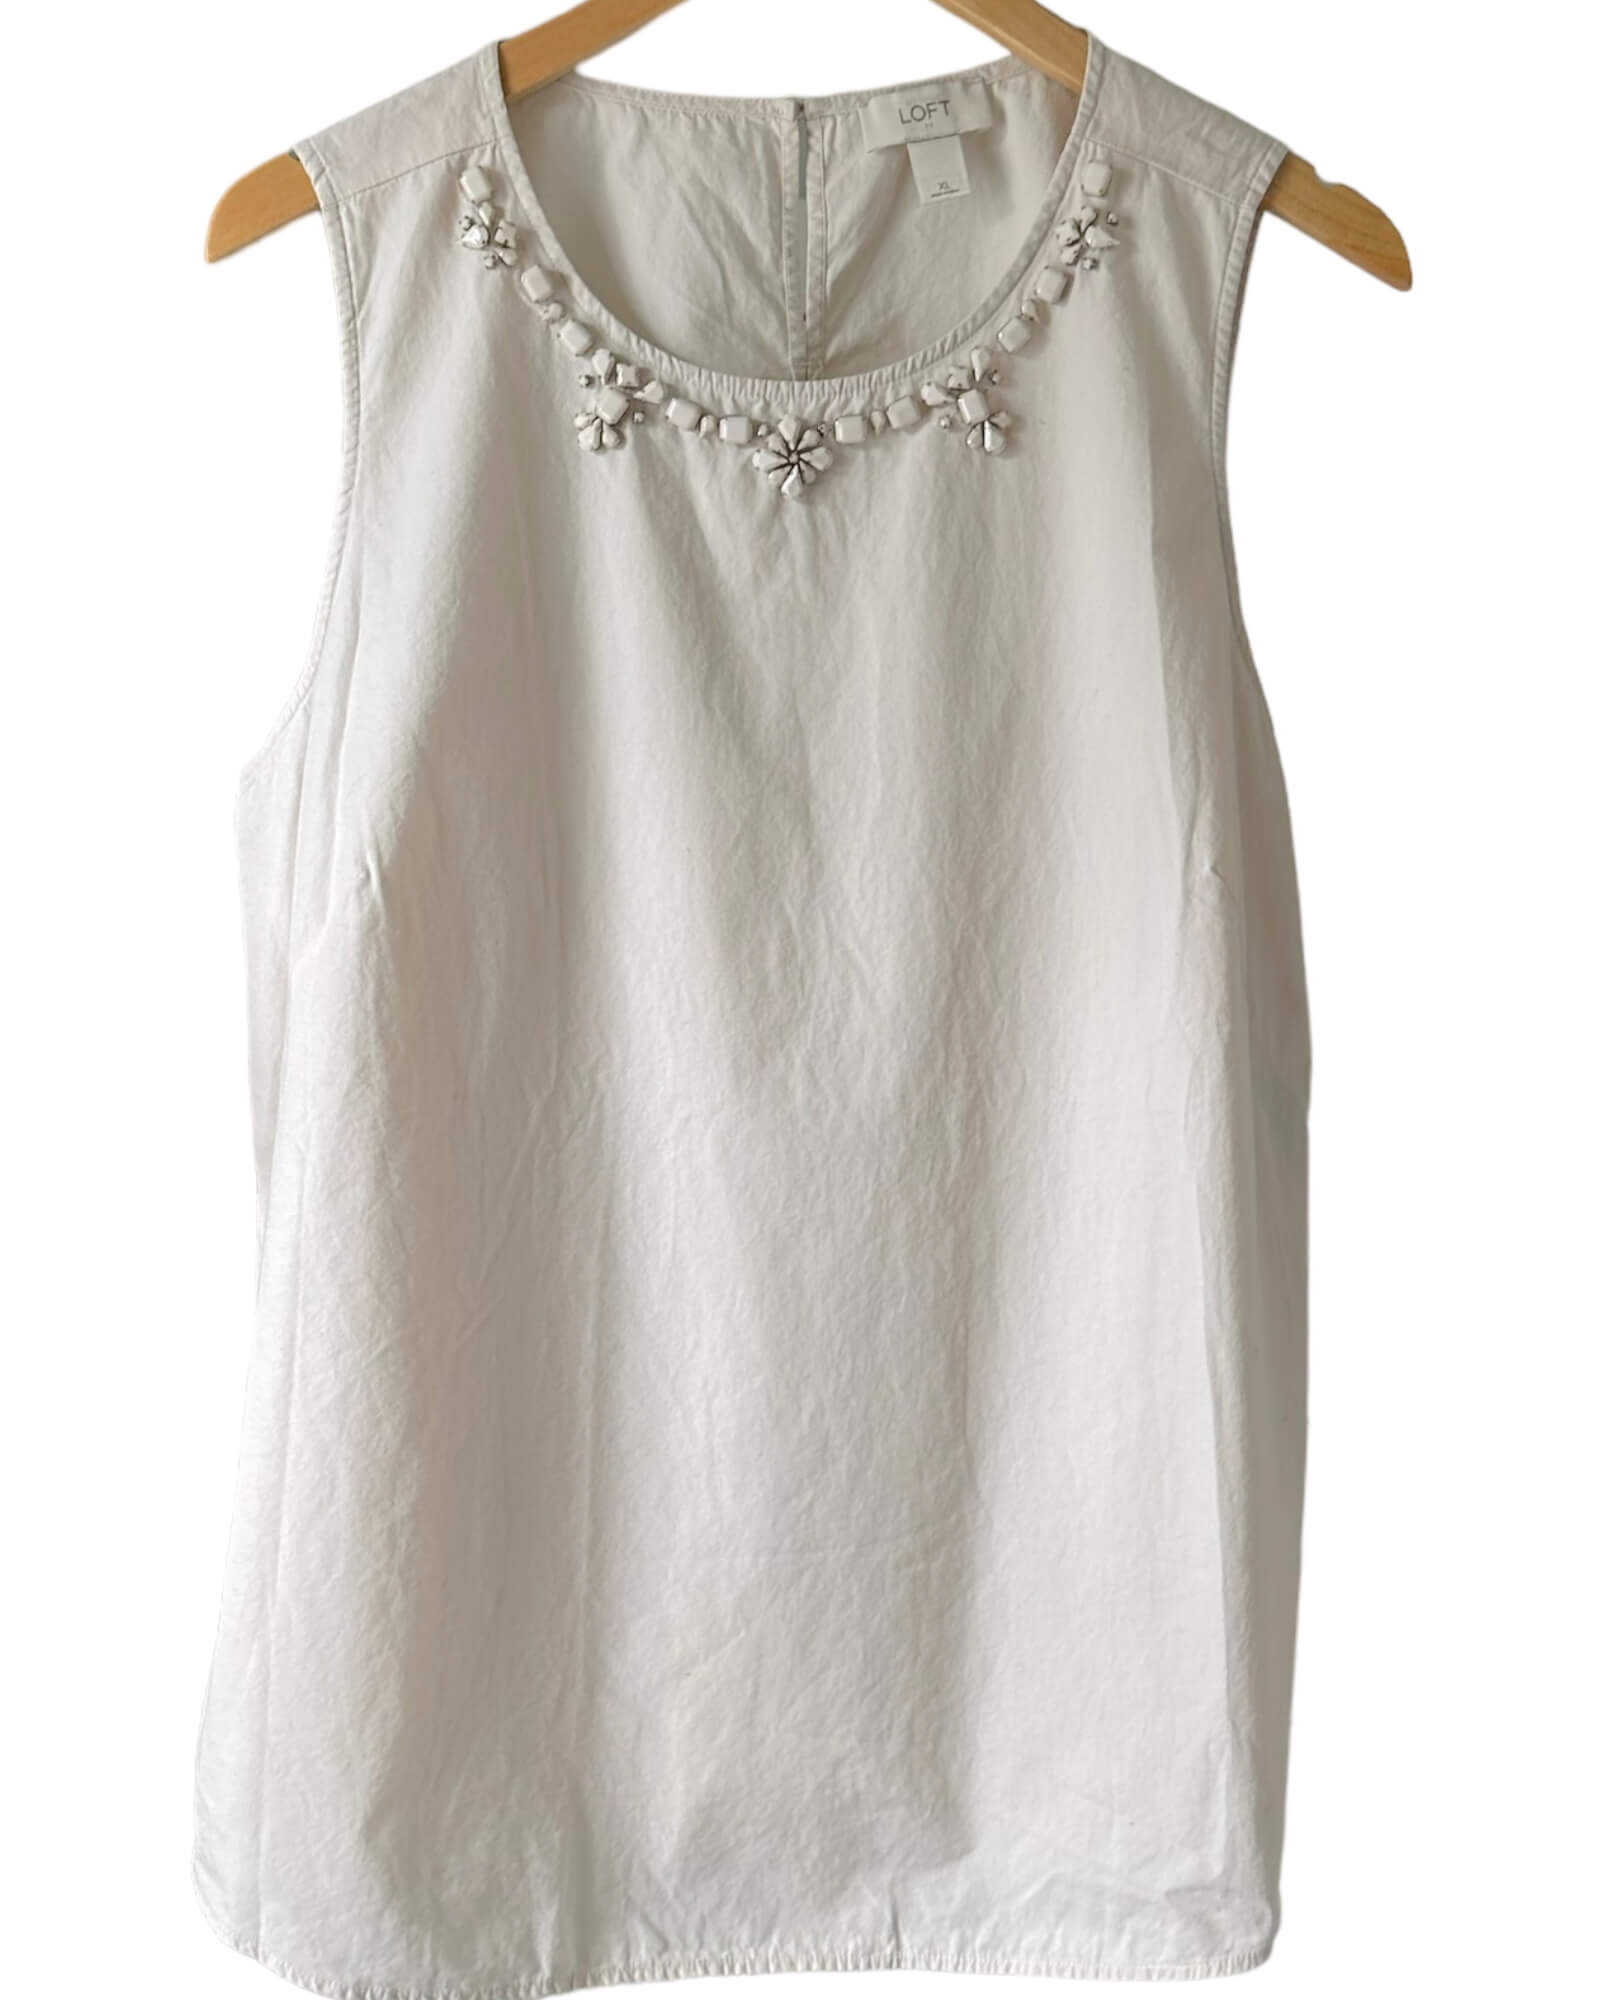 Soft Summer LOFT oyster taupe sleeveless jeweled top